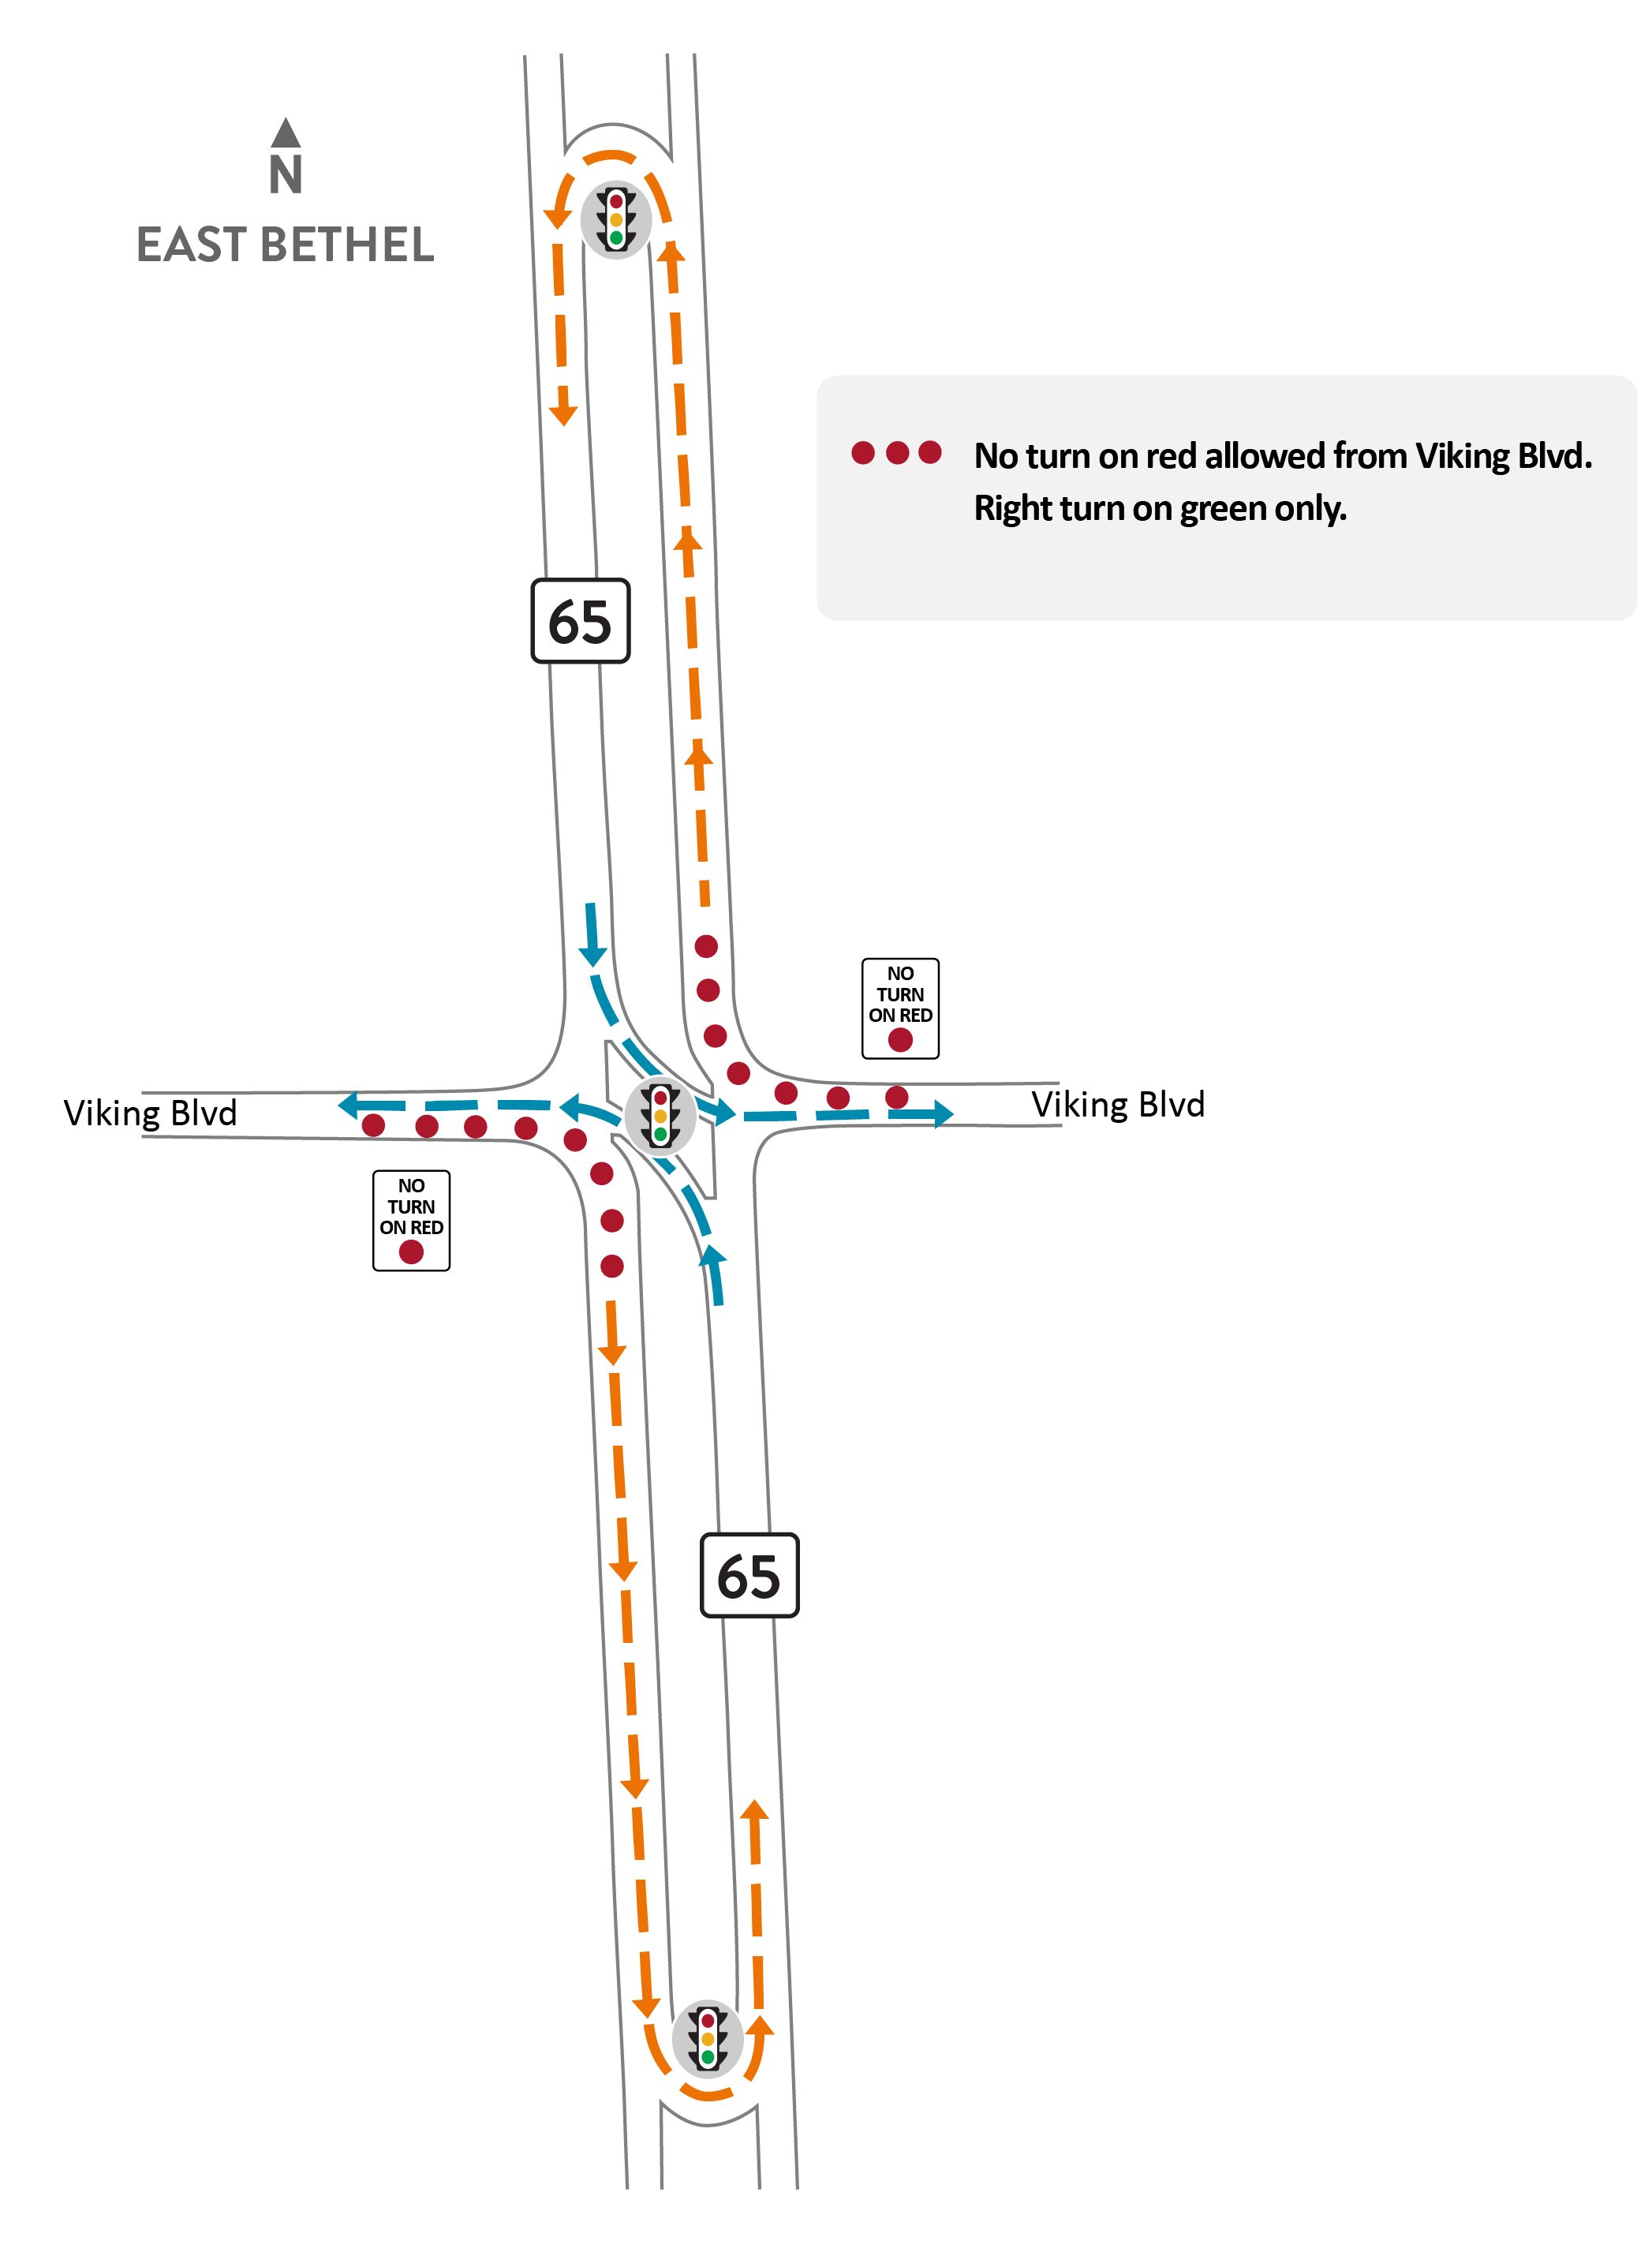 We see a reduced conflict intersection, or J-turn intersection, at highway 65 and Viking Boulevard with no right turn on red light from Viking Boulevard to highway 65.